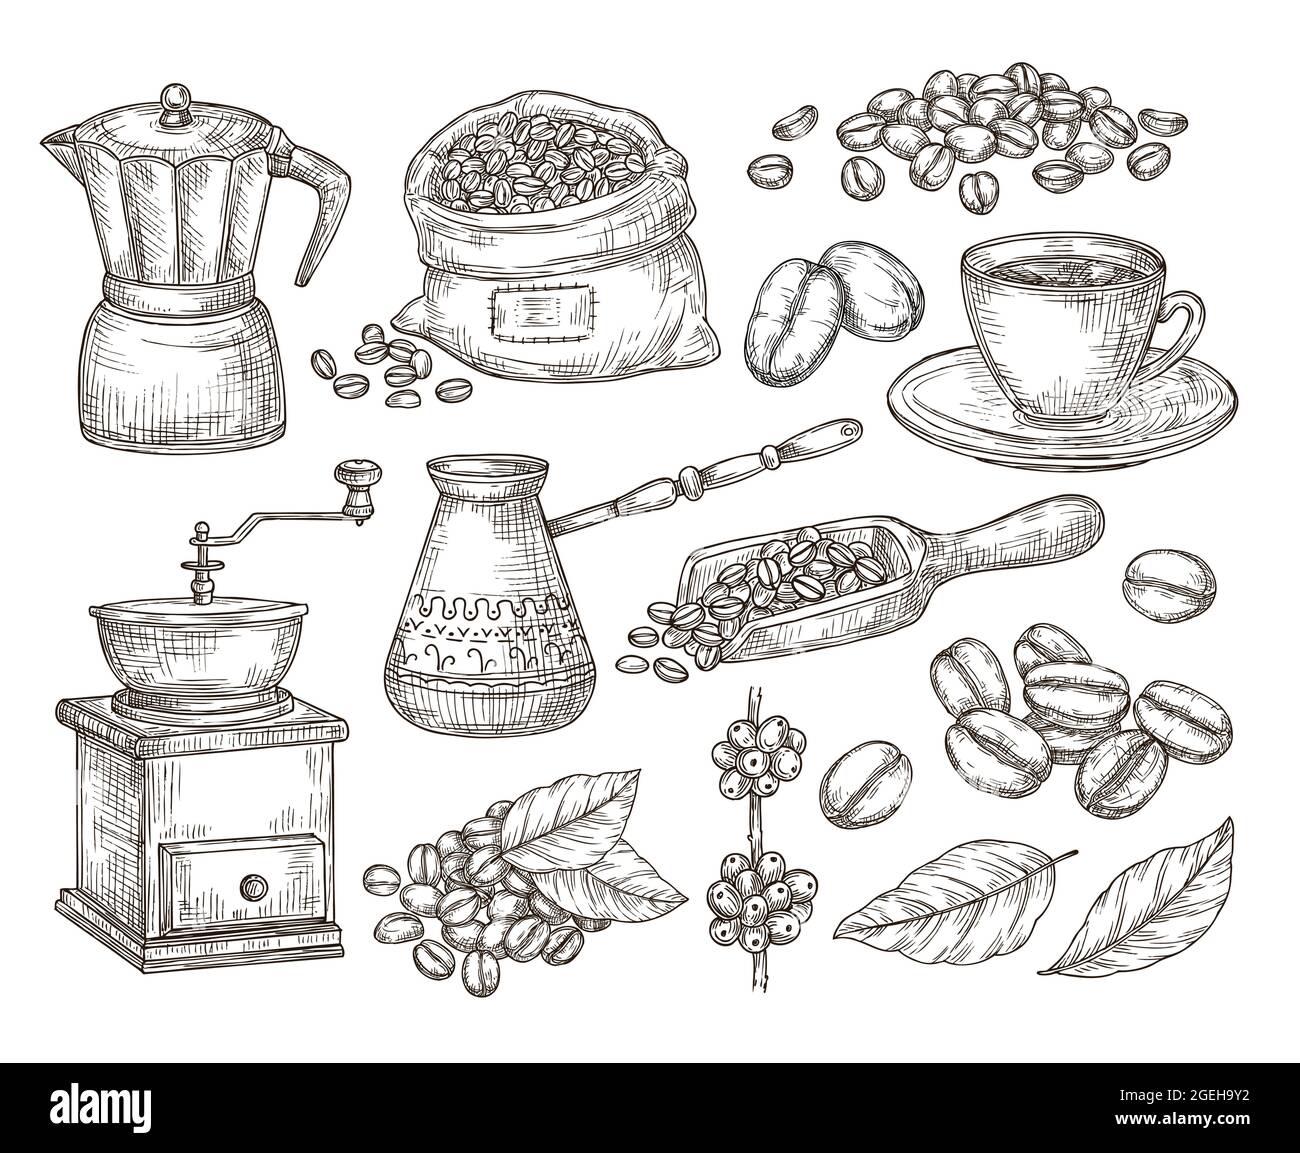 Coffee Shop Maker Equipment Tools Vector Sketch Icons Cup, Beans